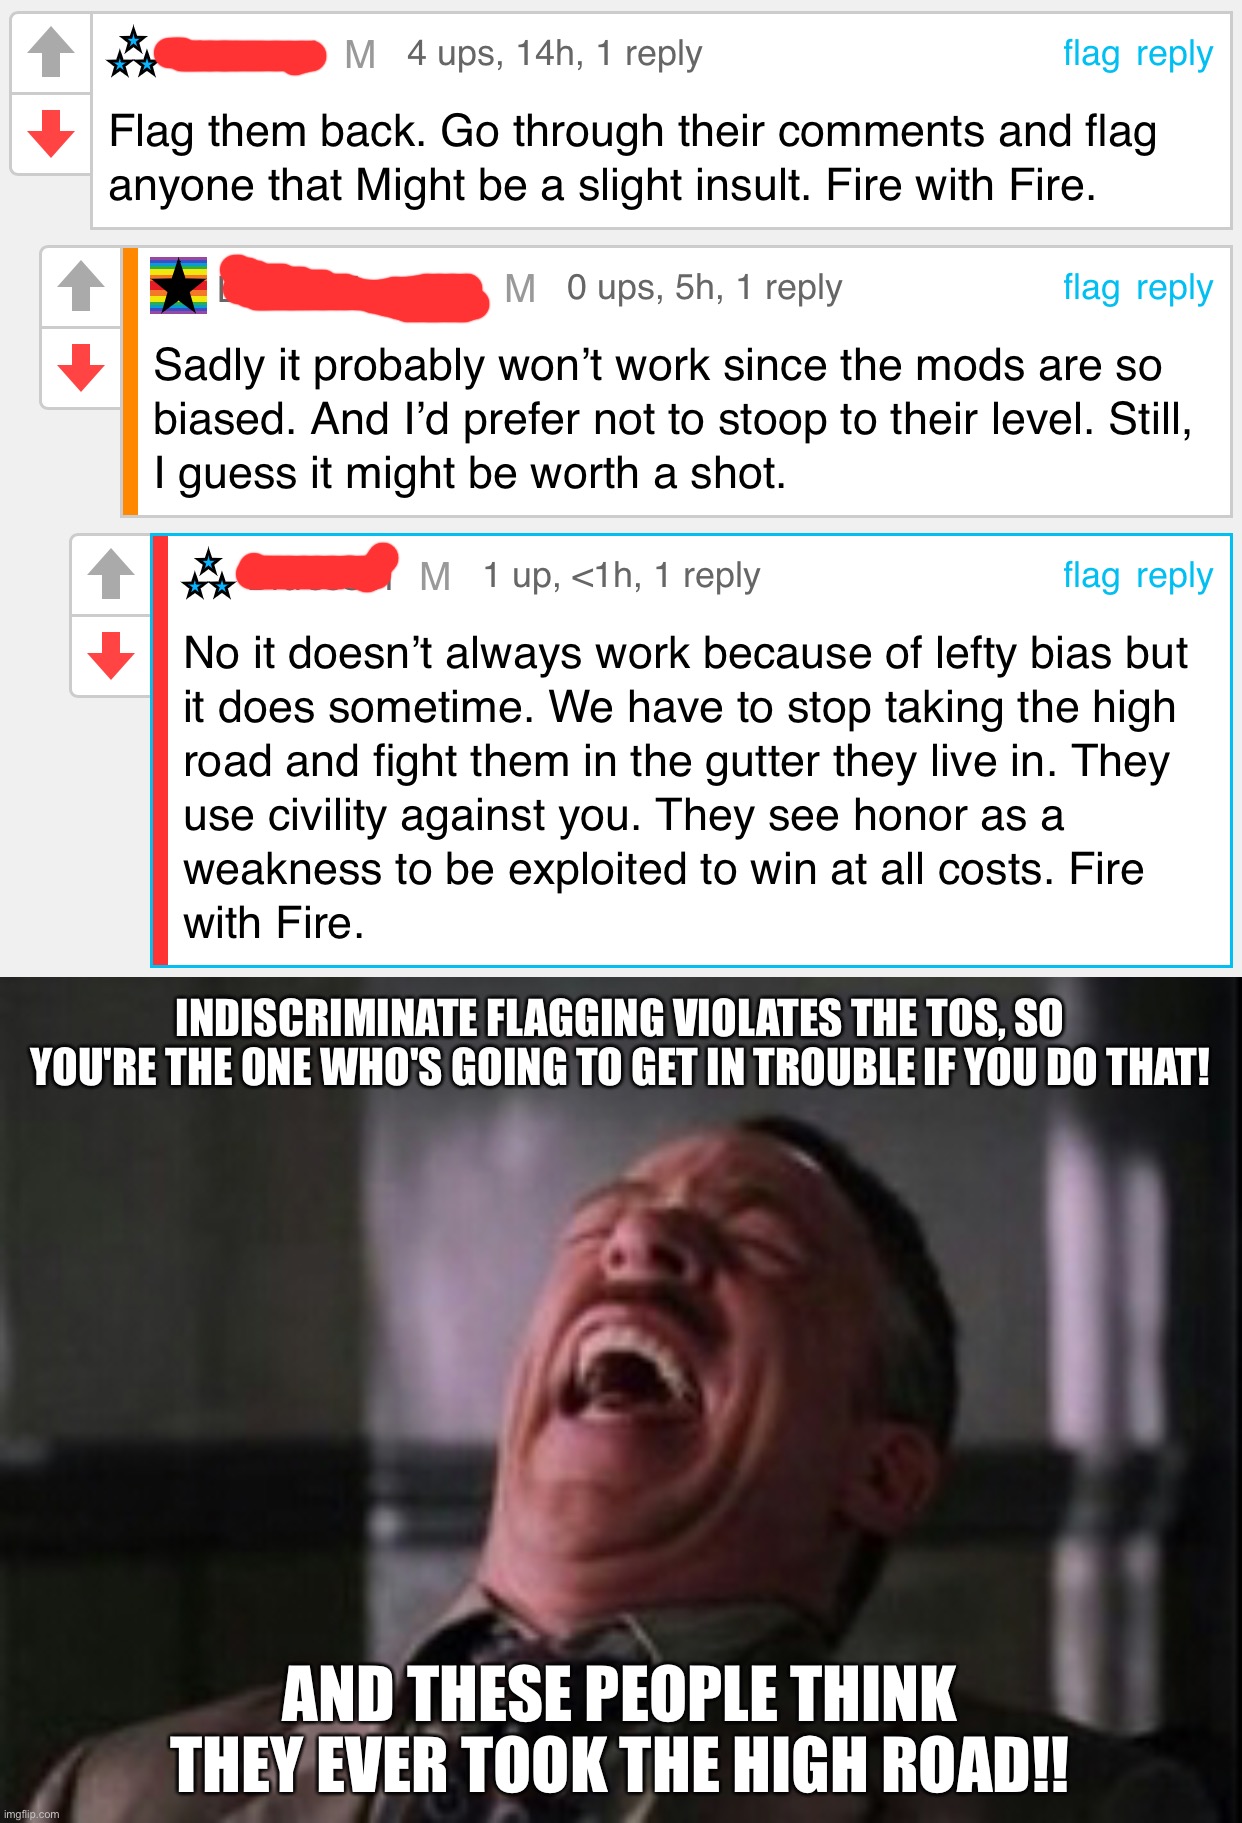 INDISCRIMINATE FLAGGING VIOLATES THE TOS, SO YOU'RE THE ONE WHO'S GOING TO GET IN TROUBLE IF YOU DO THAT! AND THESE PEOPLE THINK THEY EVER TOOK THE HIGH ROAD!! | image tagged in j jonah jameson laughing | made w/ Imgflip meme maker